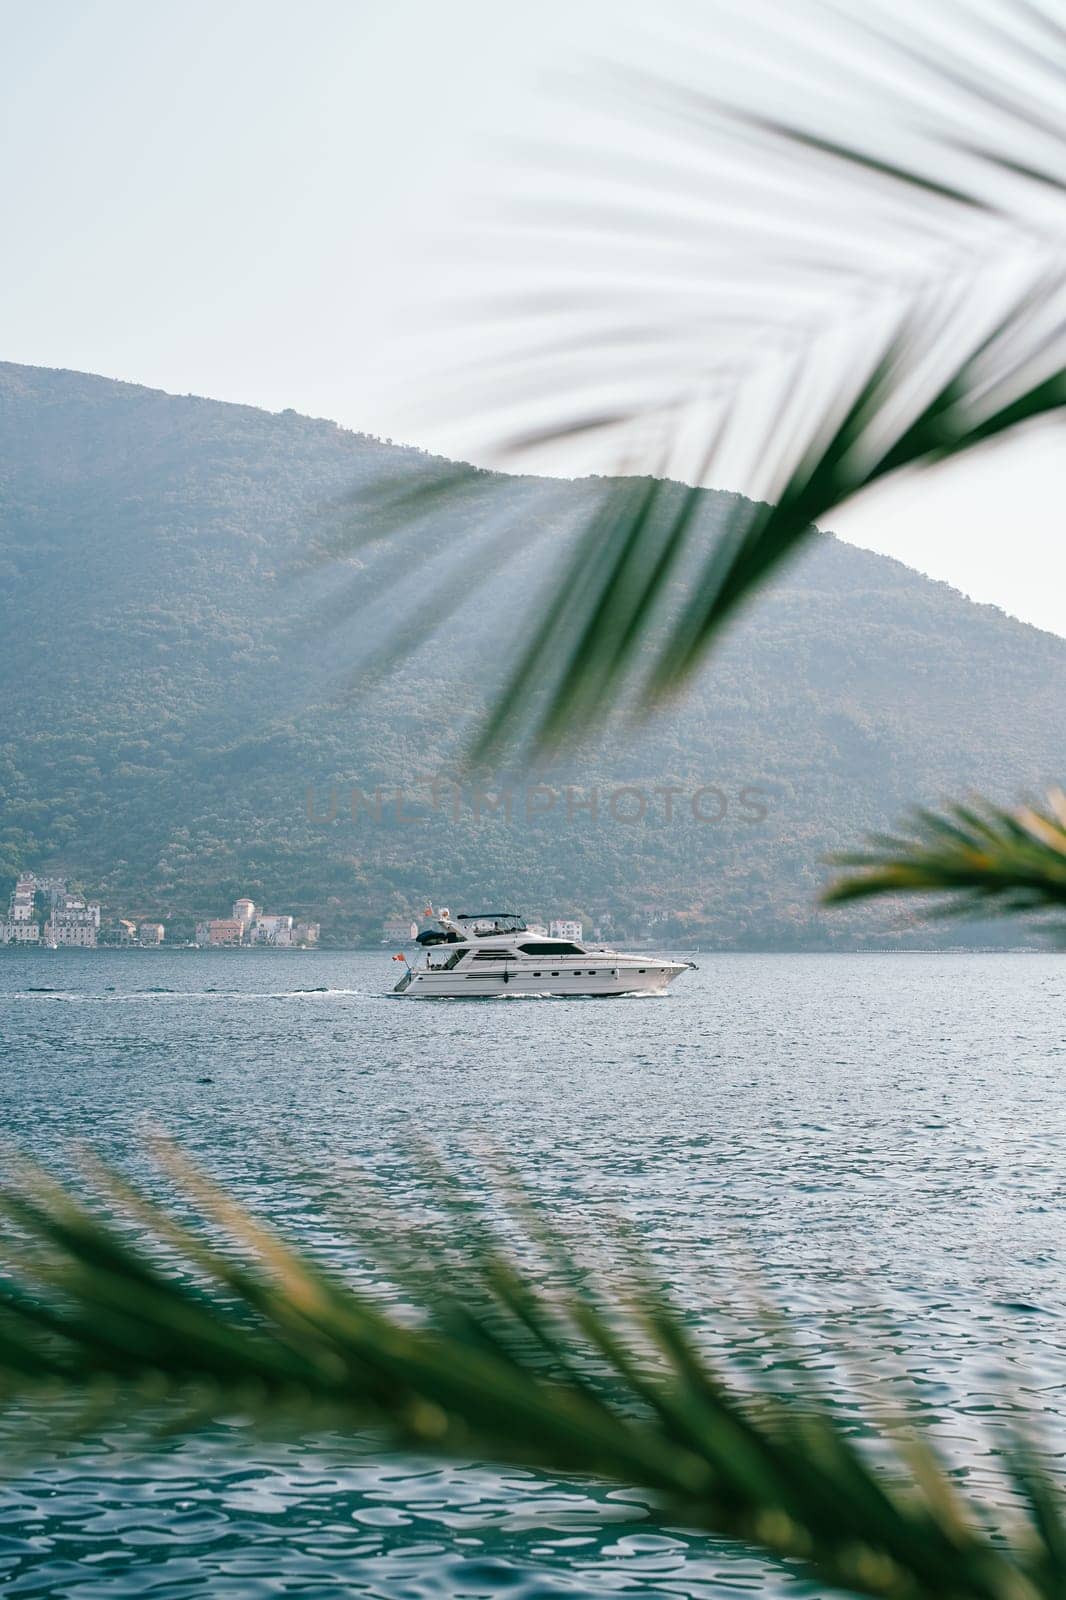 View through palm branches to a motor yacht sailing on the sea. High quality photo